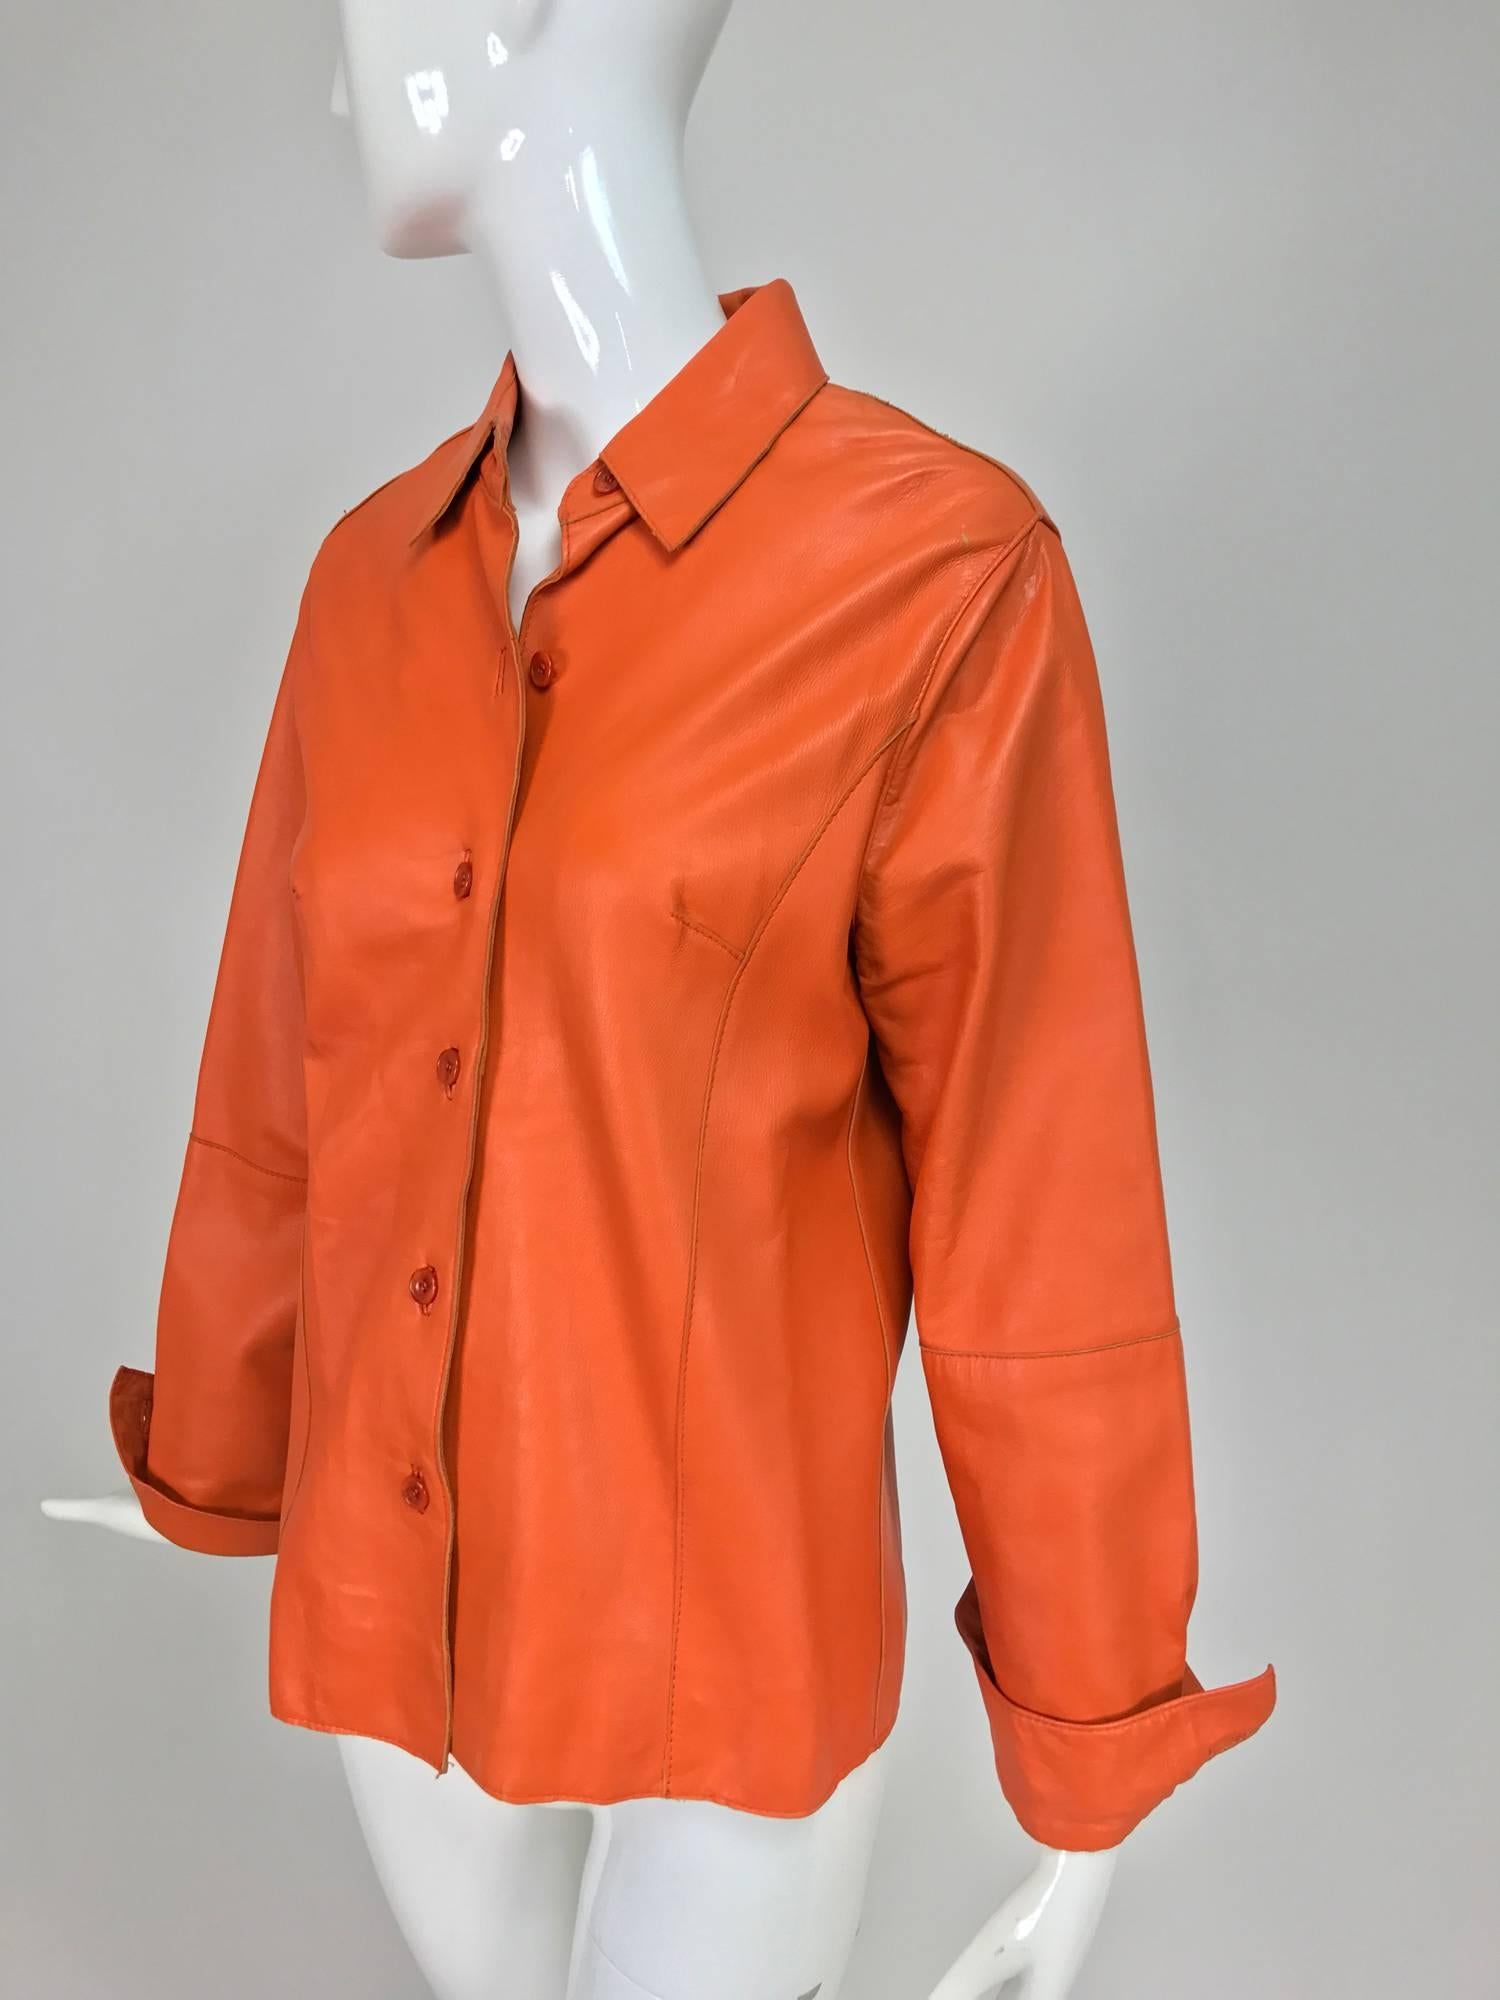 Vintage orange leather button front shirt jacket from the 1970s...Shirt style jacket with button cuff long sleeves, darted bust, button front...soft leather, fully lined in bright orange satin...A couple of very minor wear marks...Marked size medium